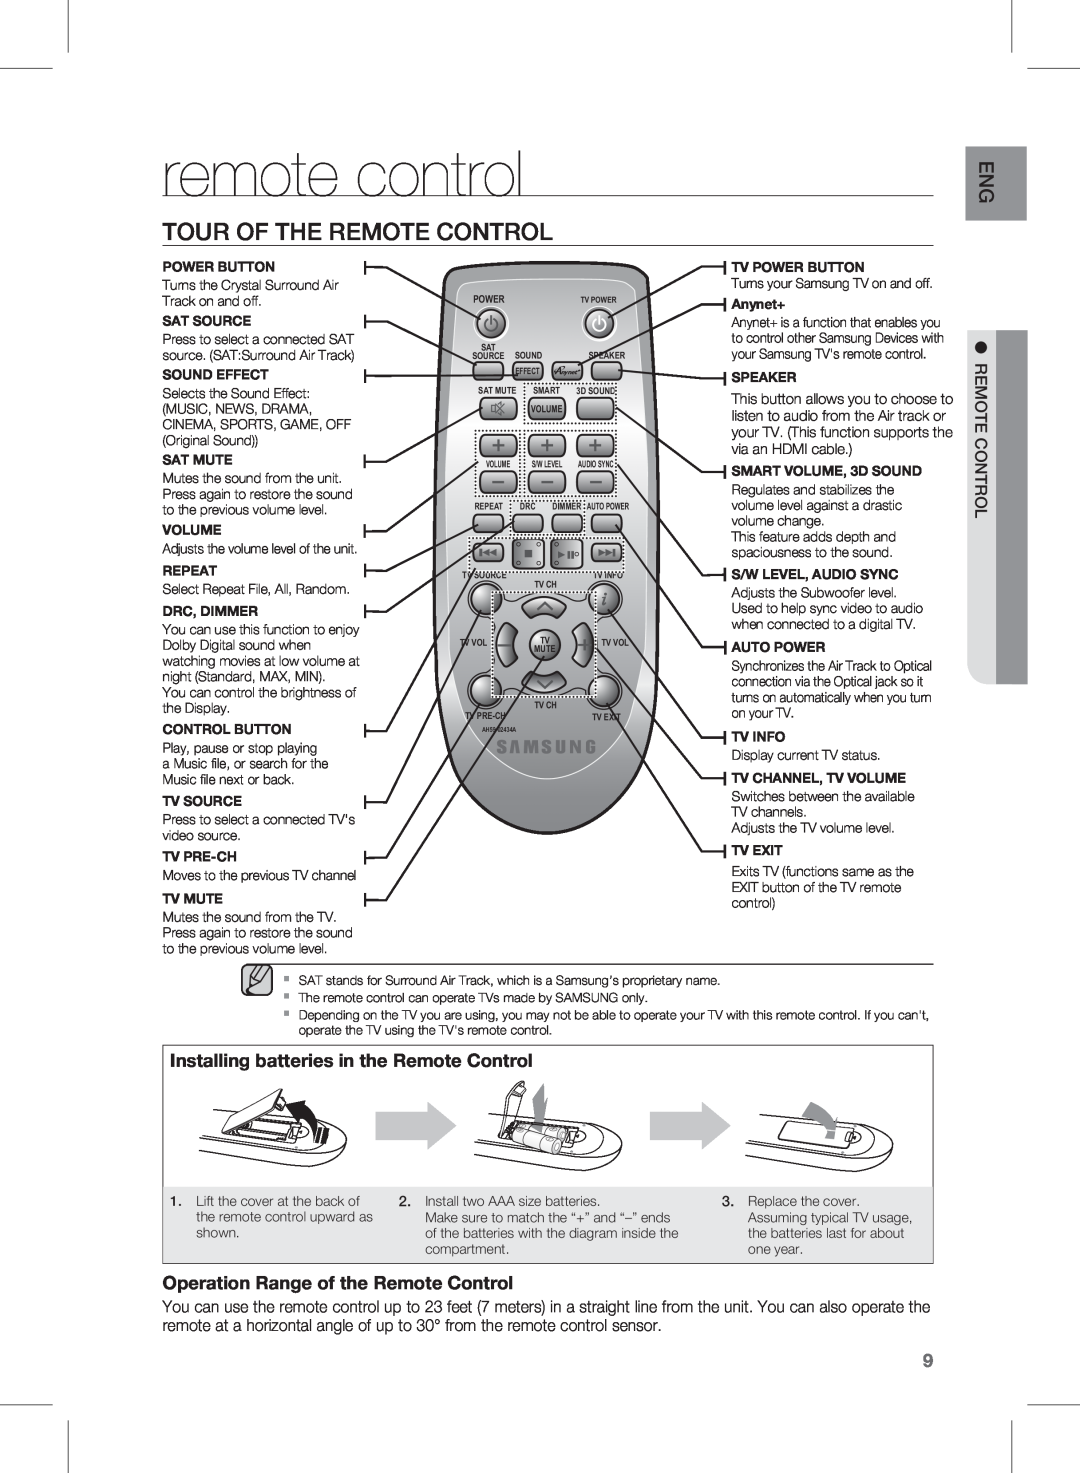 Samsung HW-E450C user manual remote control, Tour of the Remote Control, Installing batteries in the Remote Control 